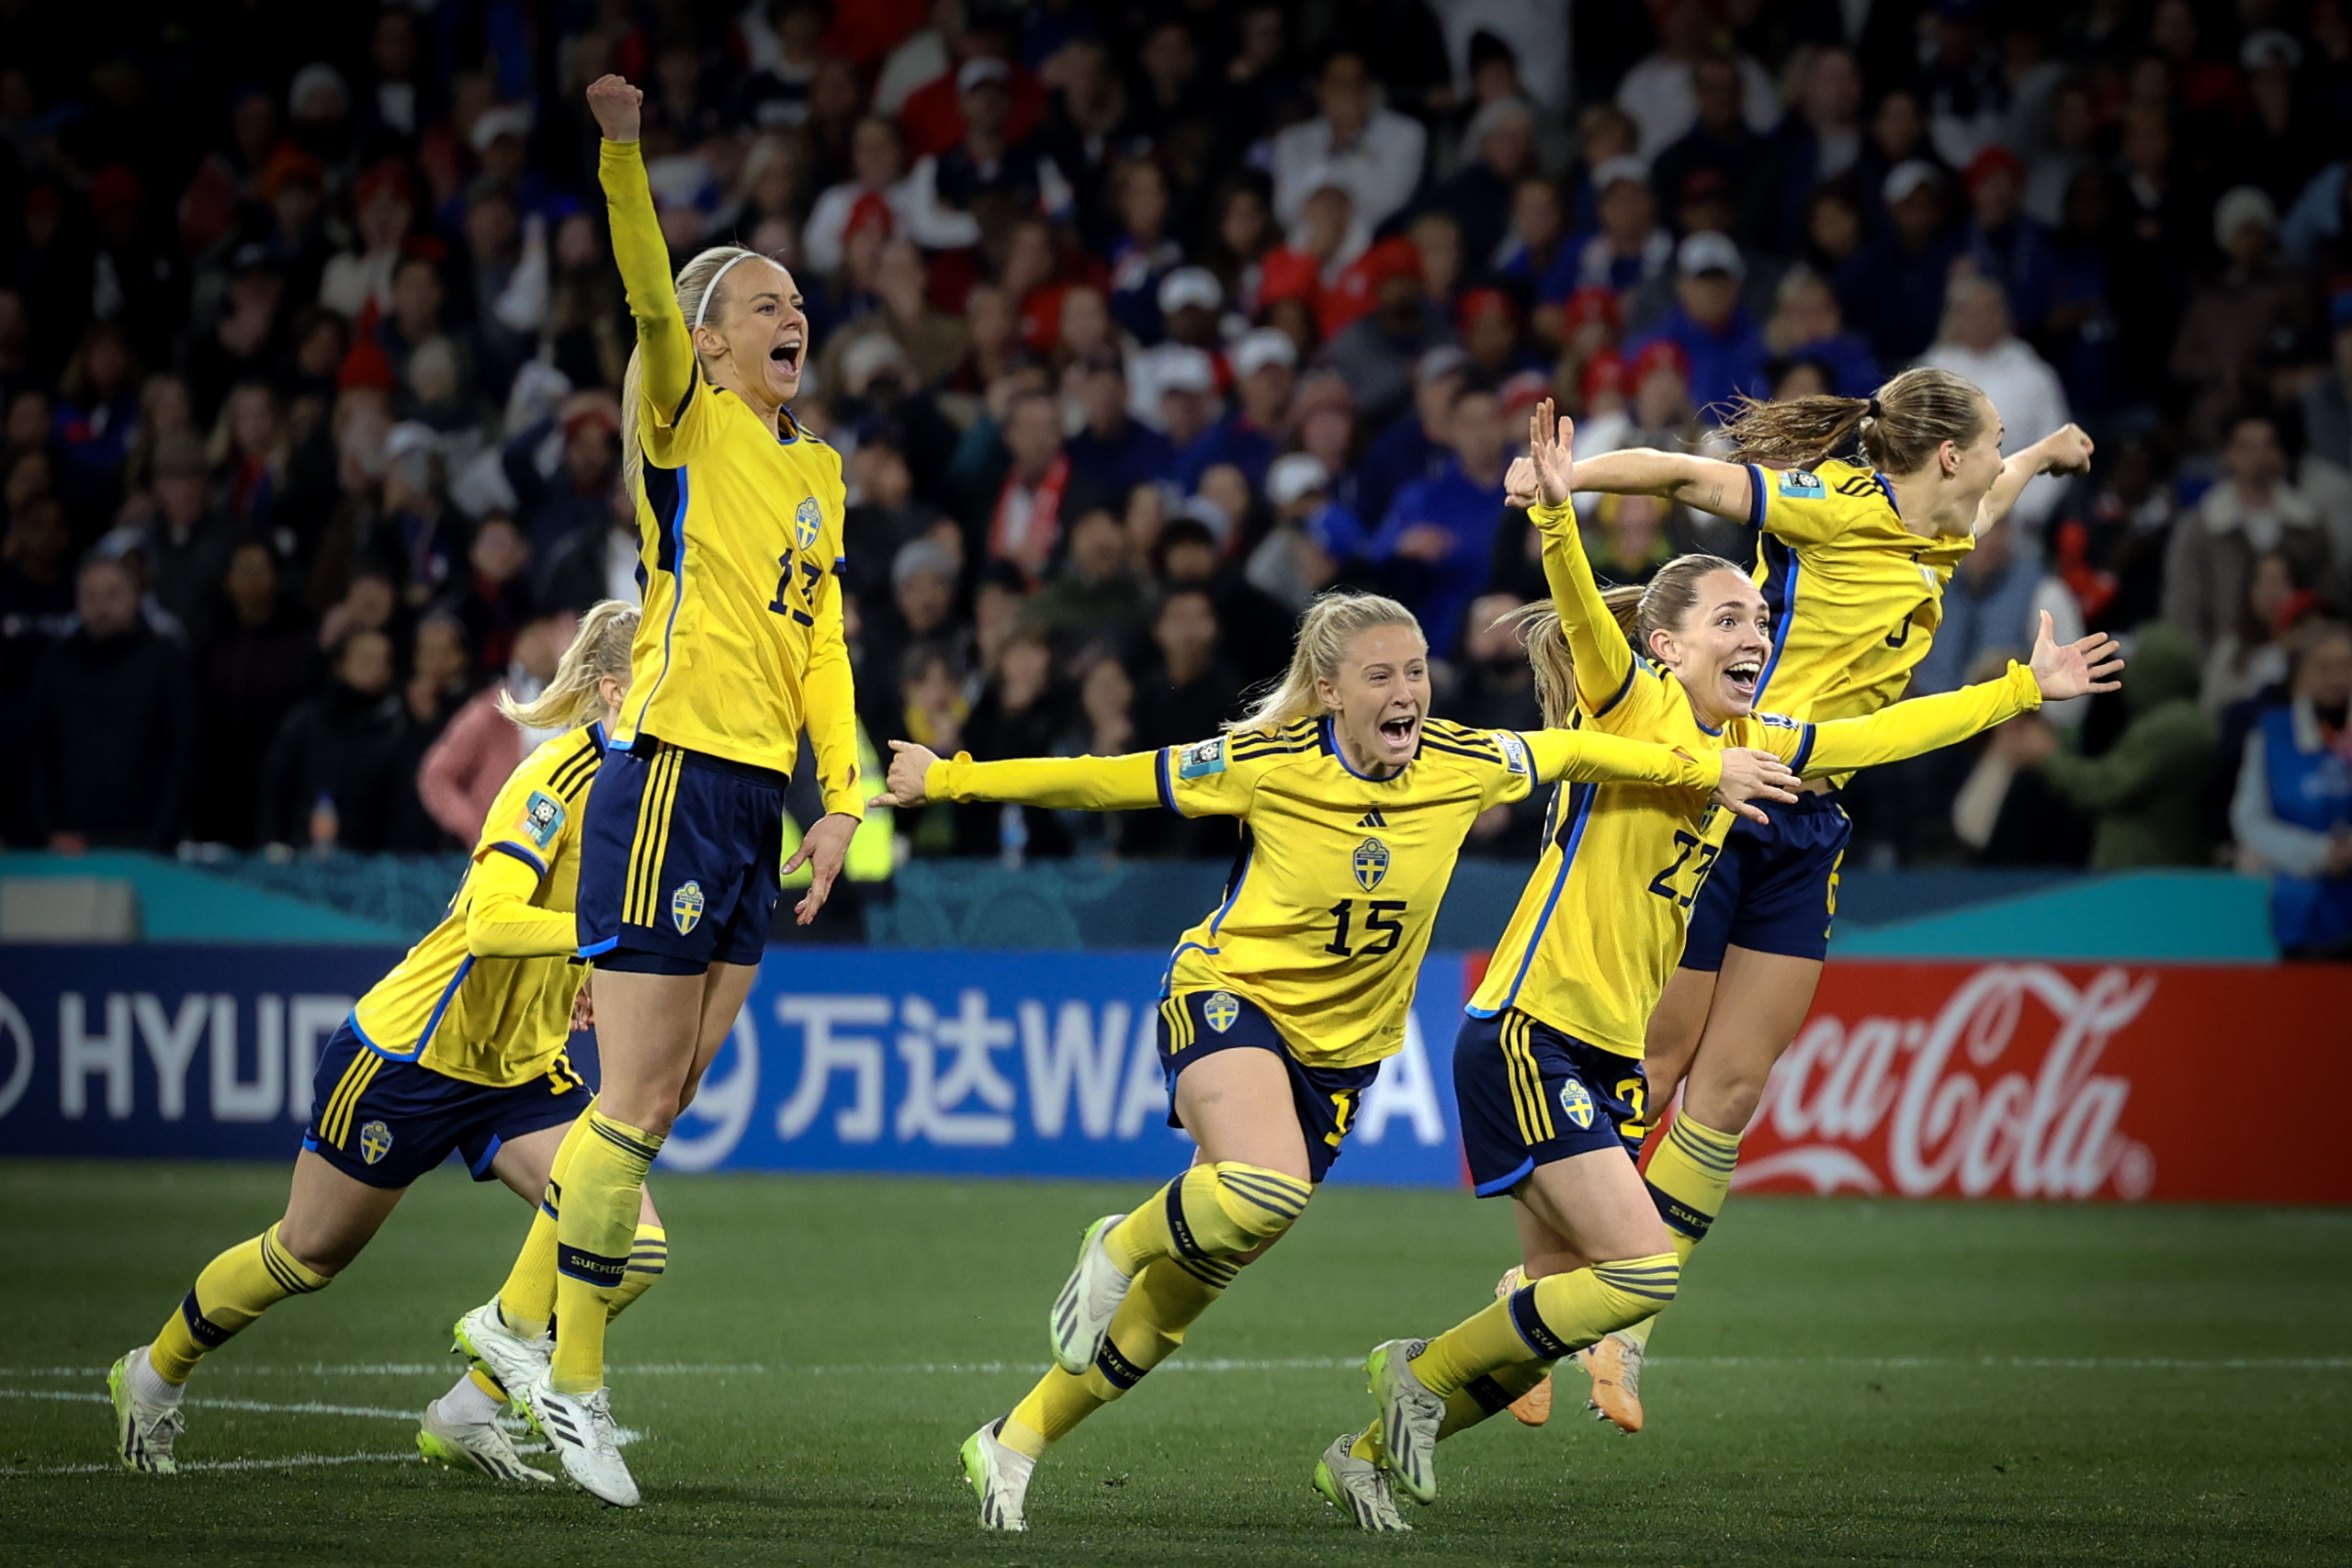 MELBOURNE - August 6, 2023: The Swedish team react after LINA HURTIG scores the decisive penalty kick during a 2023 Women's World Cup Round of 16 match between Sweden and the United States at the Melbourne Rectangular Stadium. Sweden won 5:4 on penalty kicks and advanced to the quarter-finals. 20230806_SL5_0271